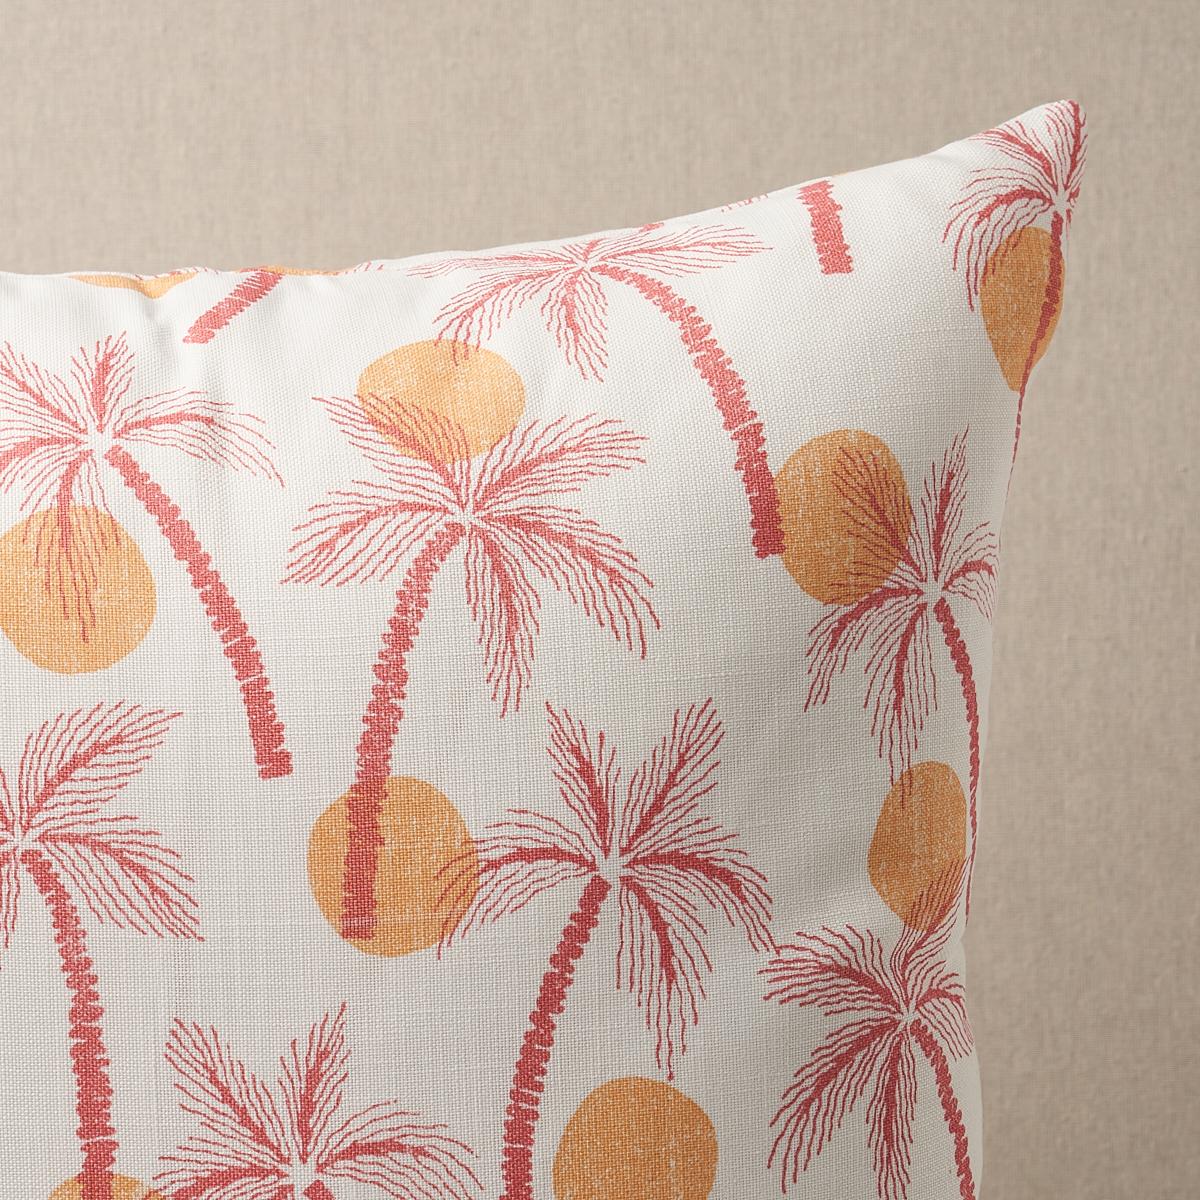 This pillow features Clarabella Palm Indoor/Outdoor with a knife edge finish. Based on an artisanal hand block pattern by designers Anna Martinez and Kristin Villatuya of Dioscvri, Clarabella Indoor/Outdoor fabric in citrus is a simple stylized palm